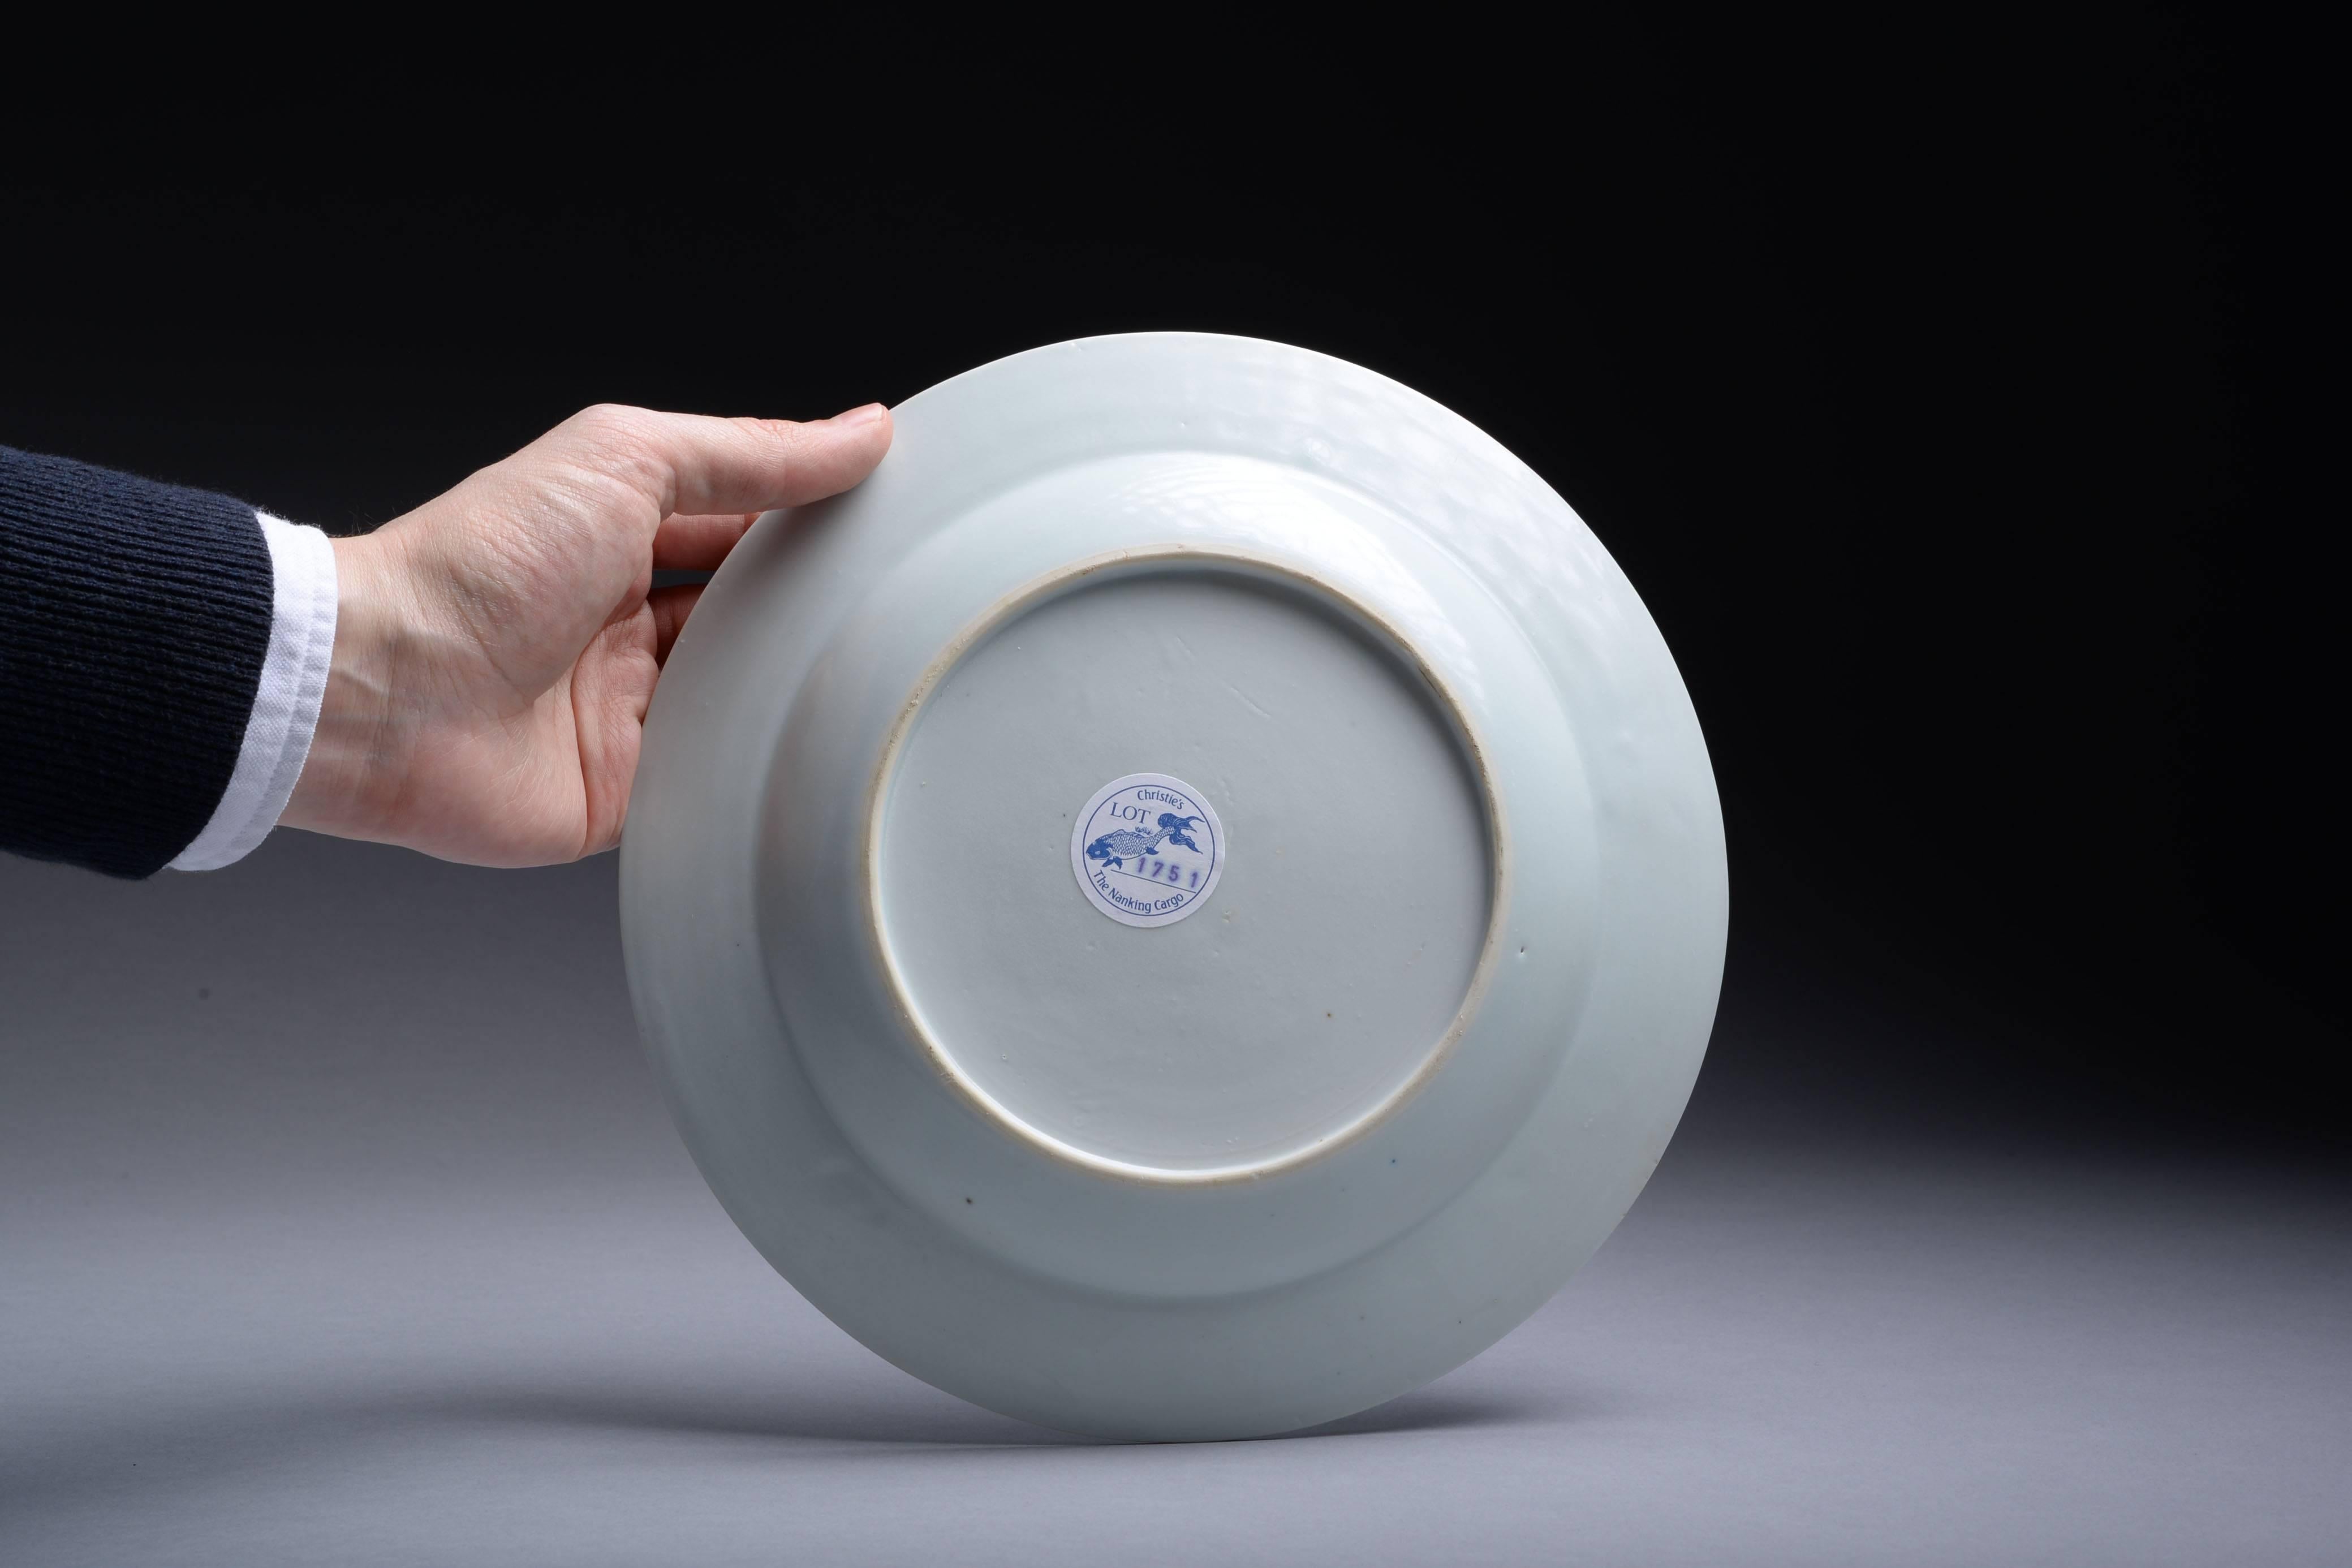 A perfectly preserved, vibrant, Chinese blue on white porcelain dinner plate, dating to approximately 1750 and salvaged from the famous Nanking cargo - an officially recorded piece with Christie's sticker and inventory number.


The centre of the